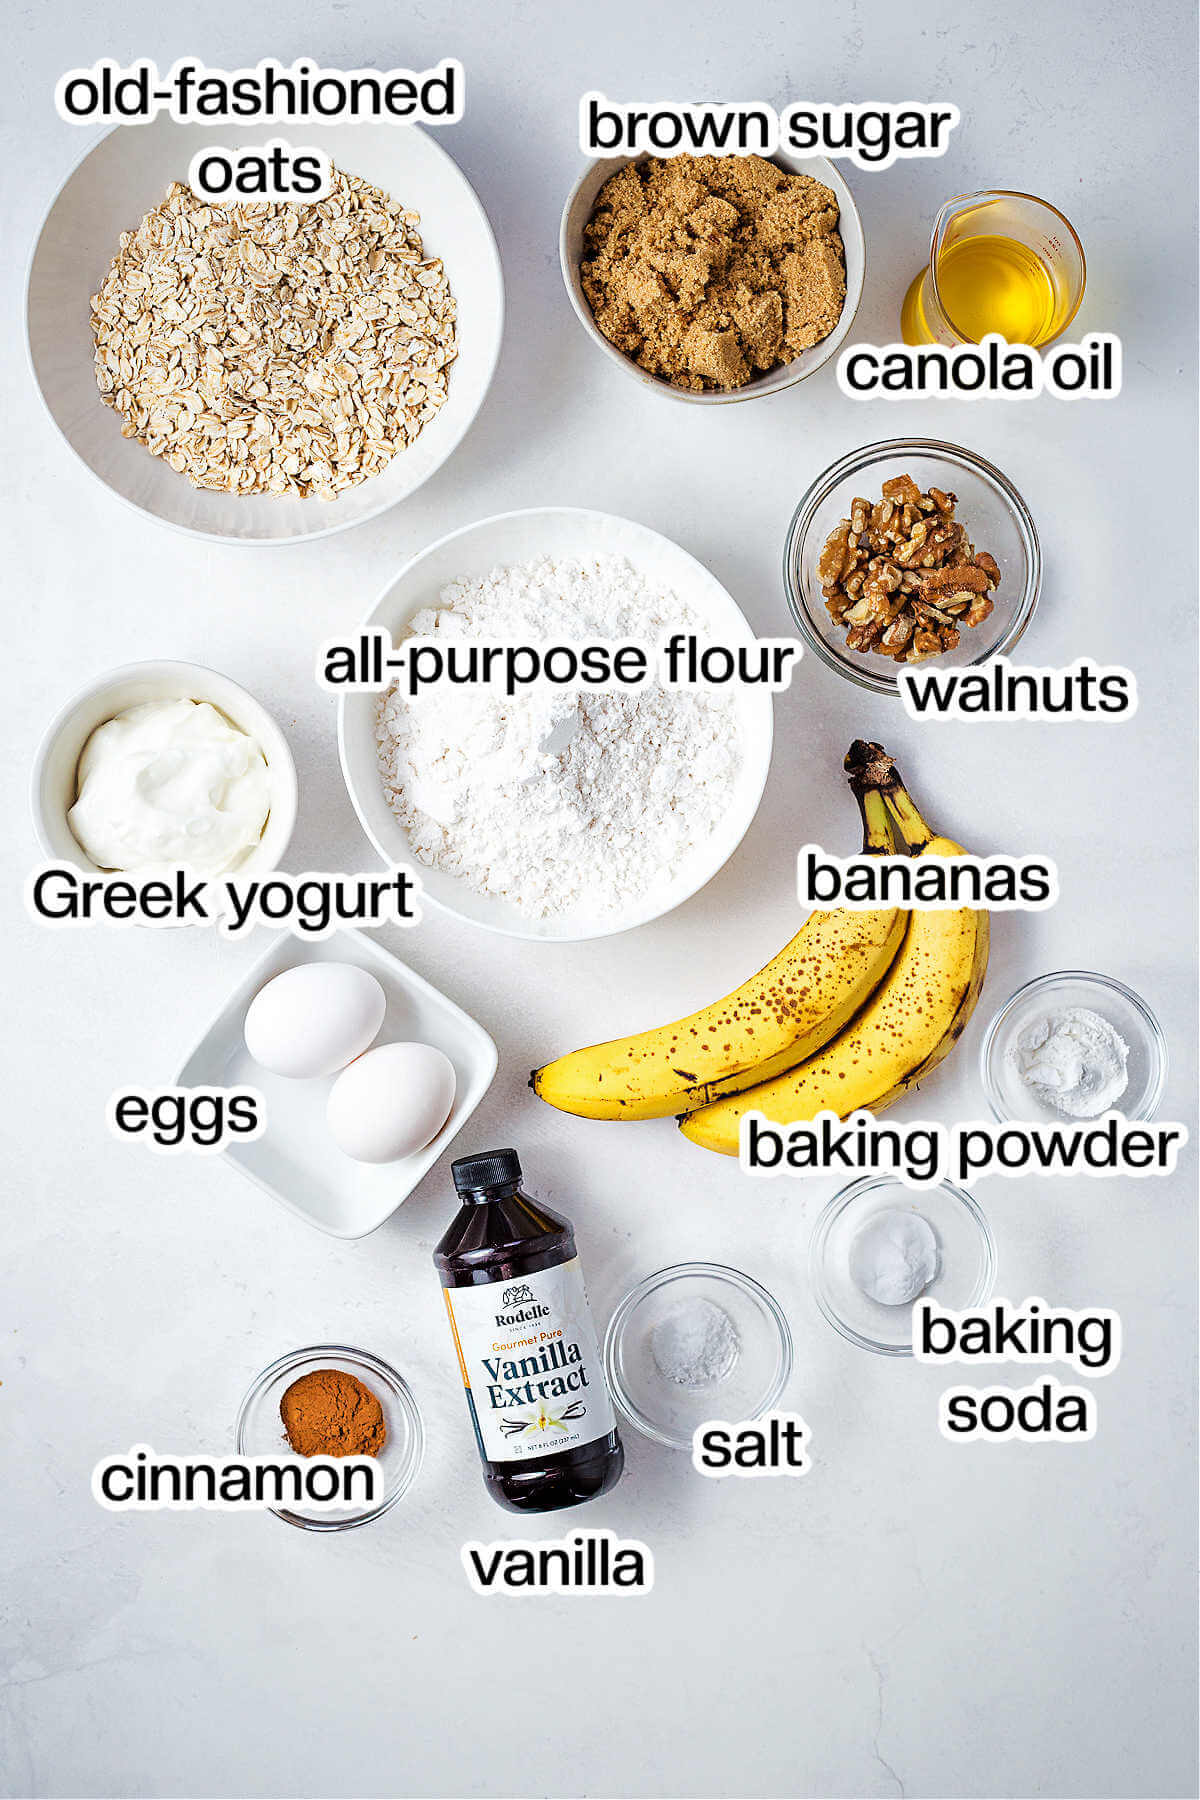 Ingredients for banana muffins on a table.